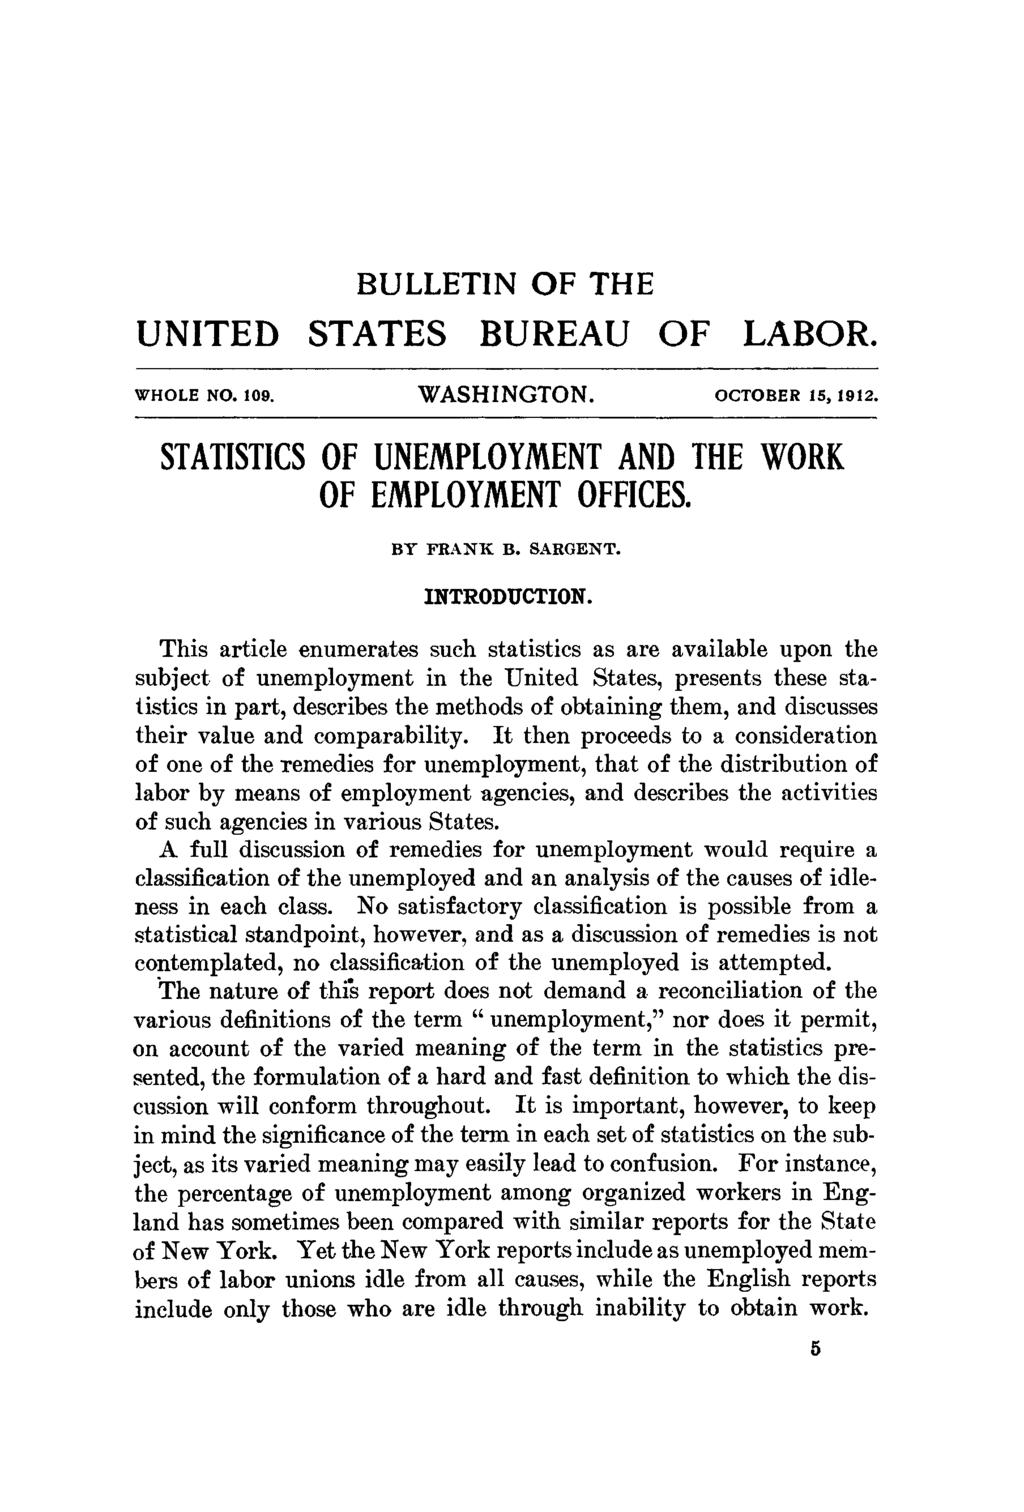 BULLETIN OF THE UNITED STATES BUREAU OF LABOR. w h o l e n o. 109. WASHINGTON. o c t o b e r 15, 1912. STATISTICS OF UNEMPLOYMENT AND THE WORK OF EMPLOYMENT OFFICES. BY FRANK B. SARGENT. INTRODUCTION.